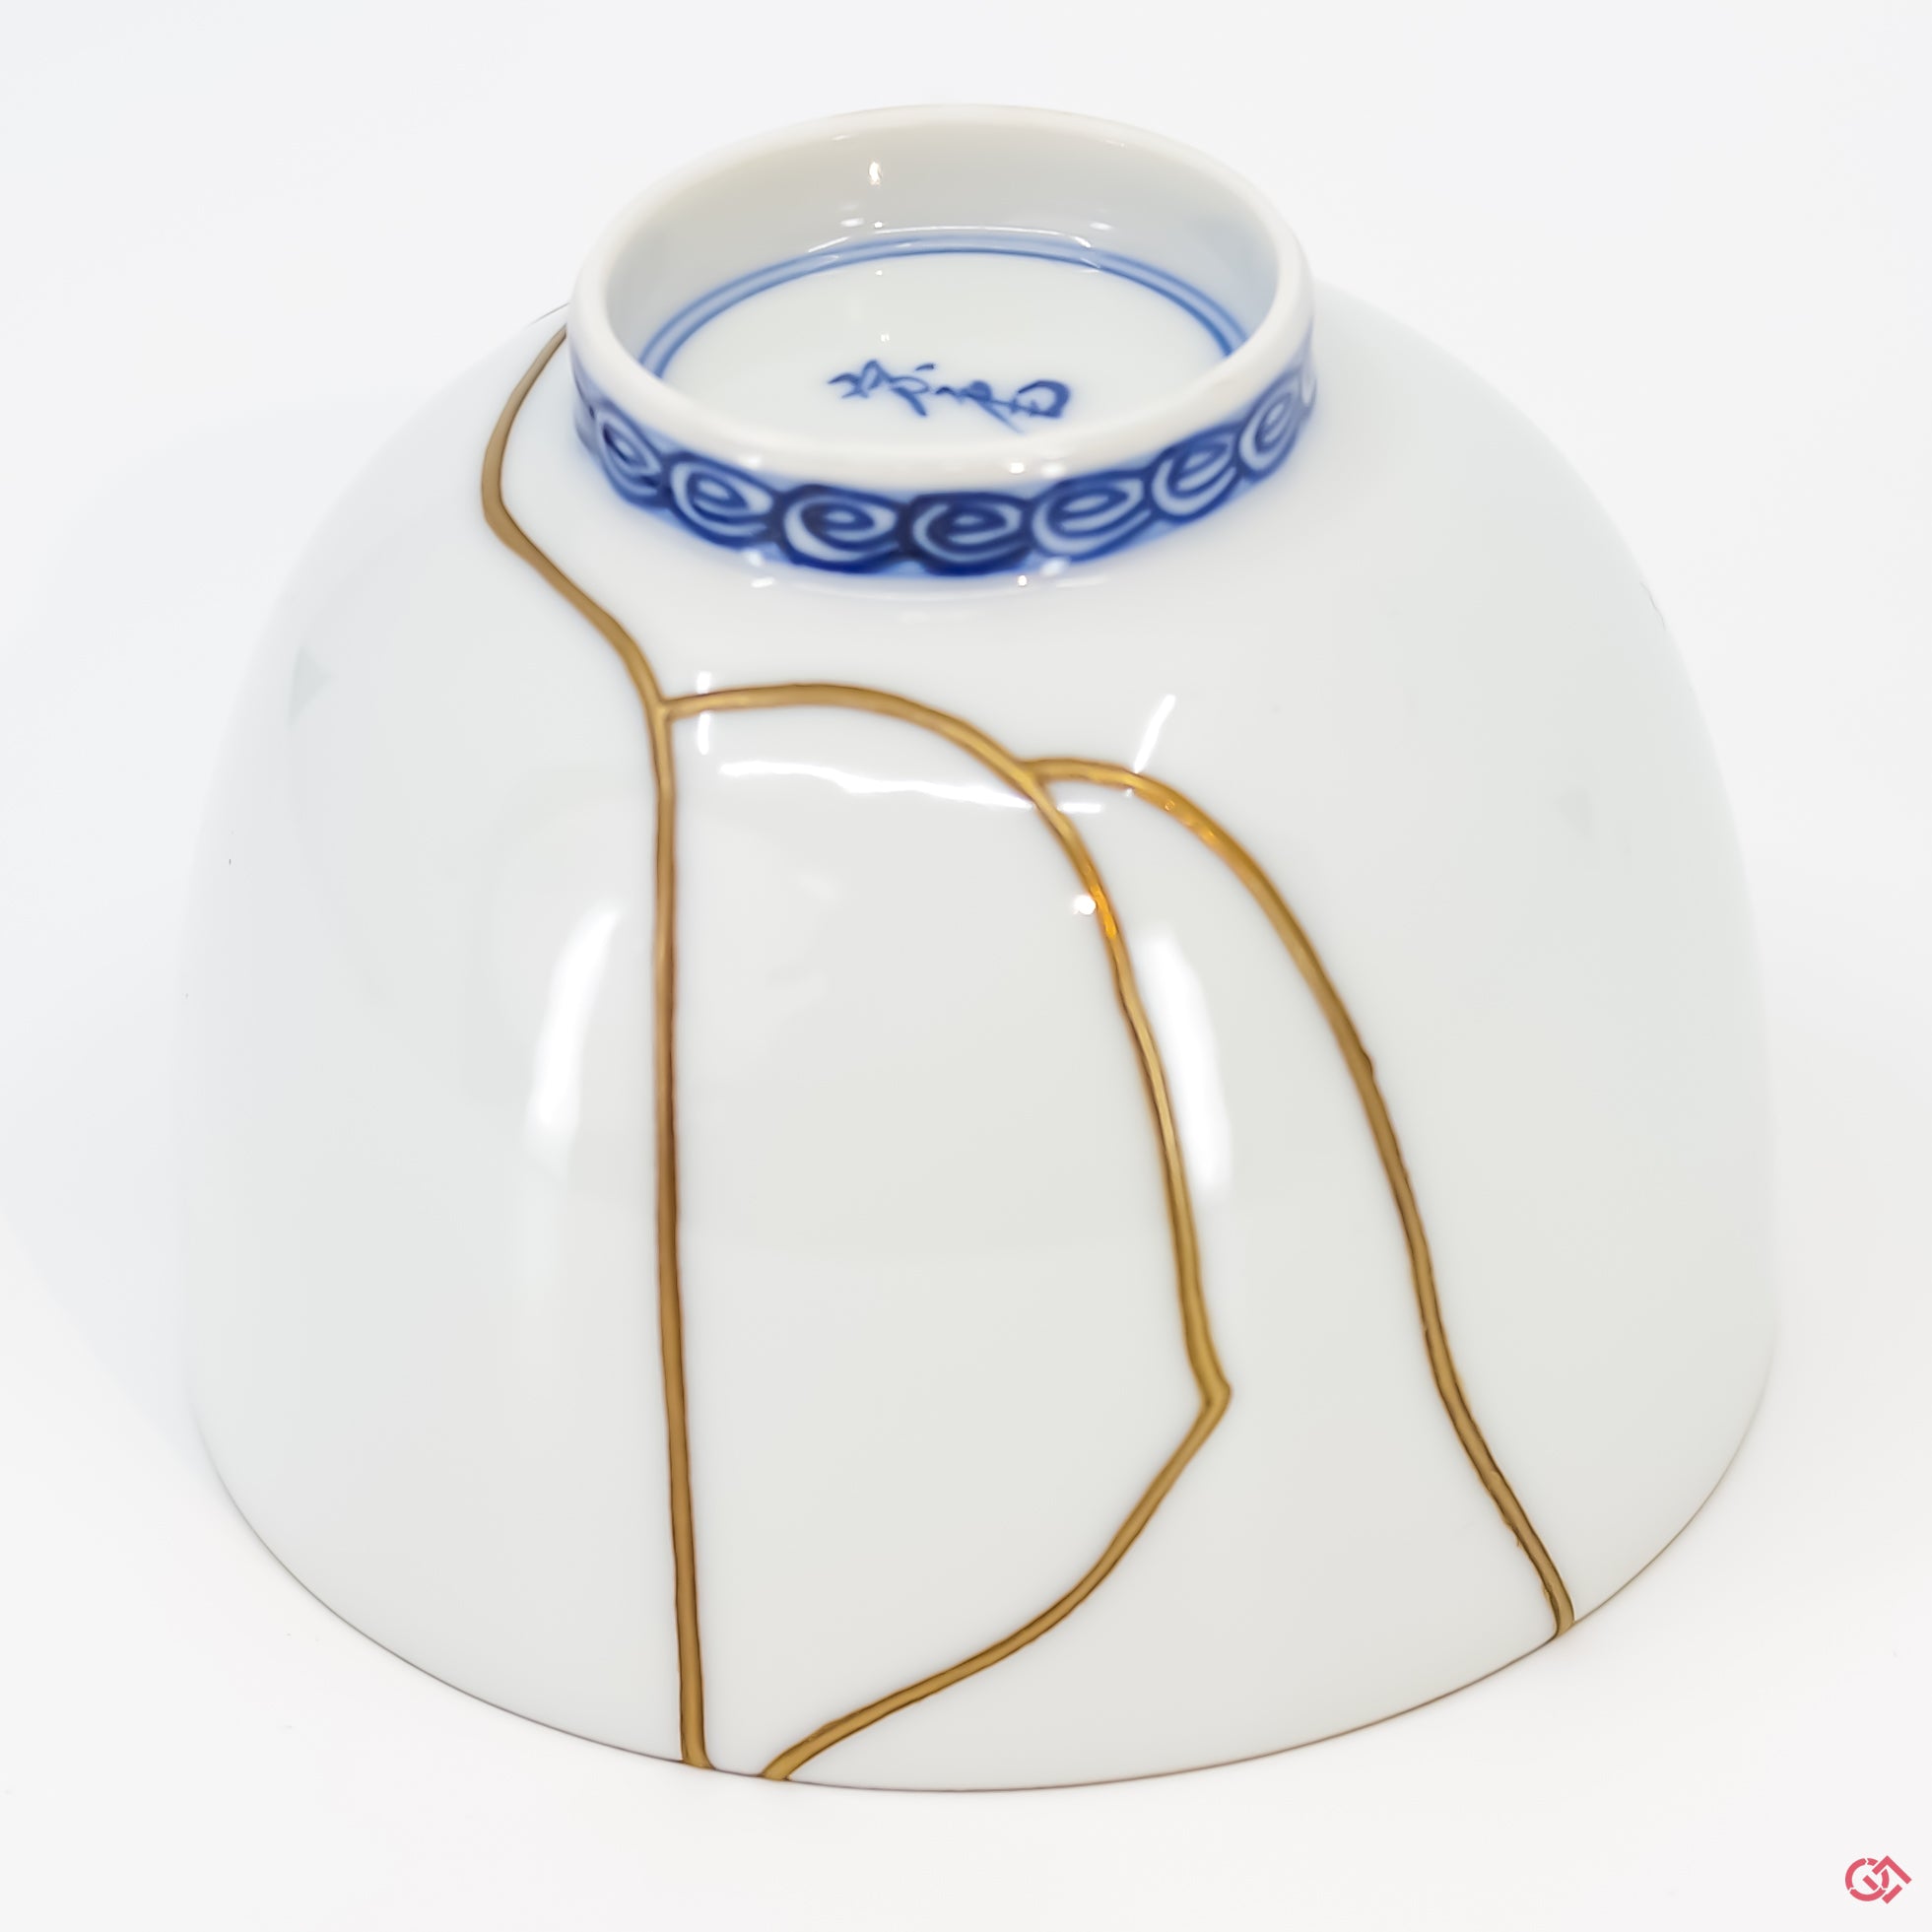 Close-up photo of an authentic Kintsugi pottery piece, showing the detail of its repairs and craftsmanship